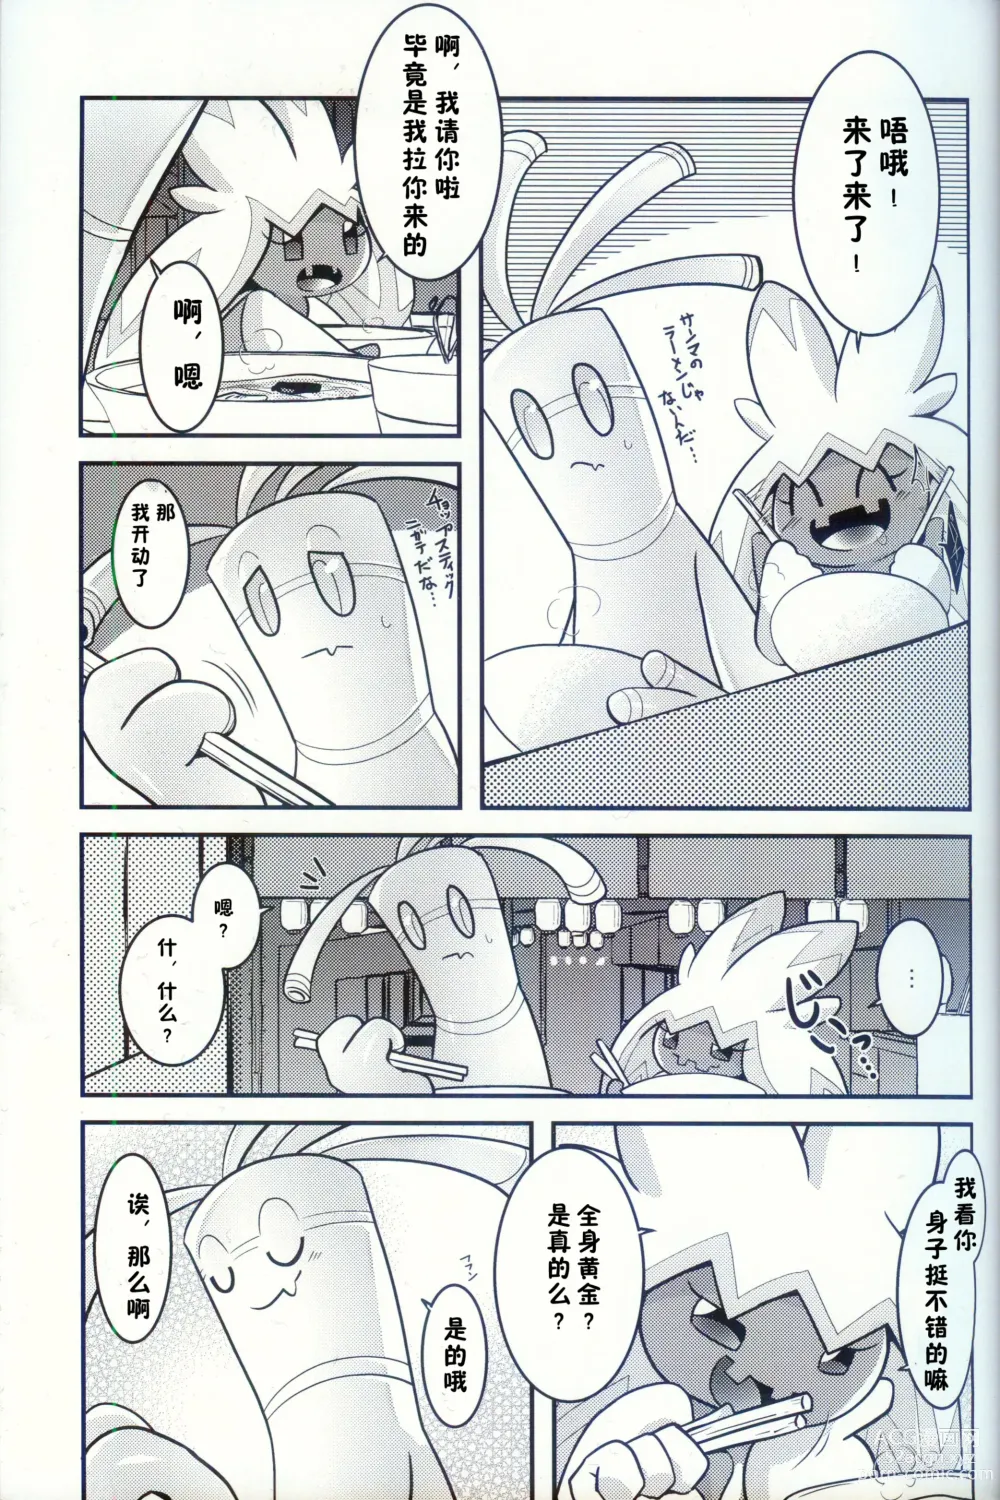 Page 6 of doujinshi 横滨的塞富豪巨锻匠